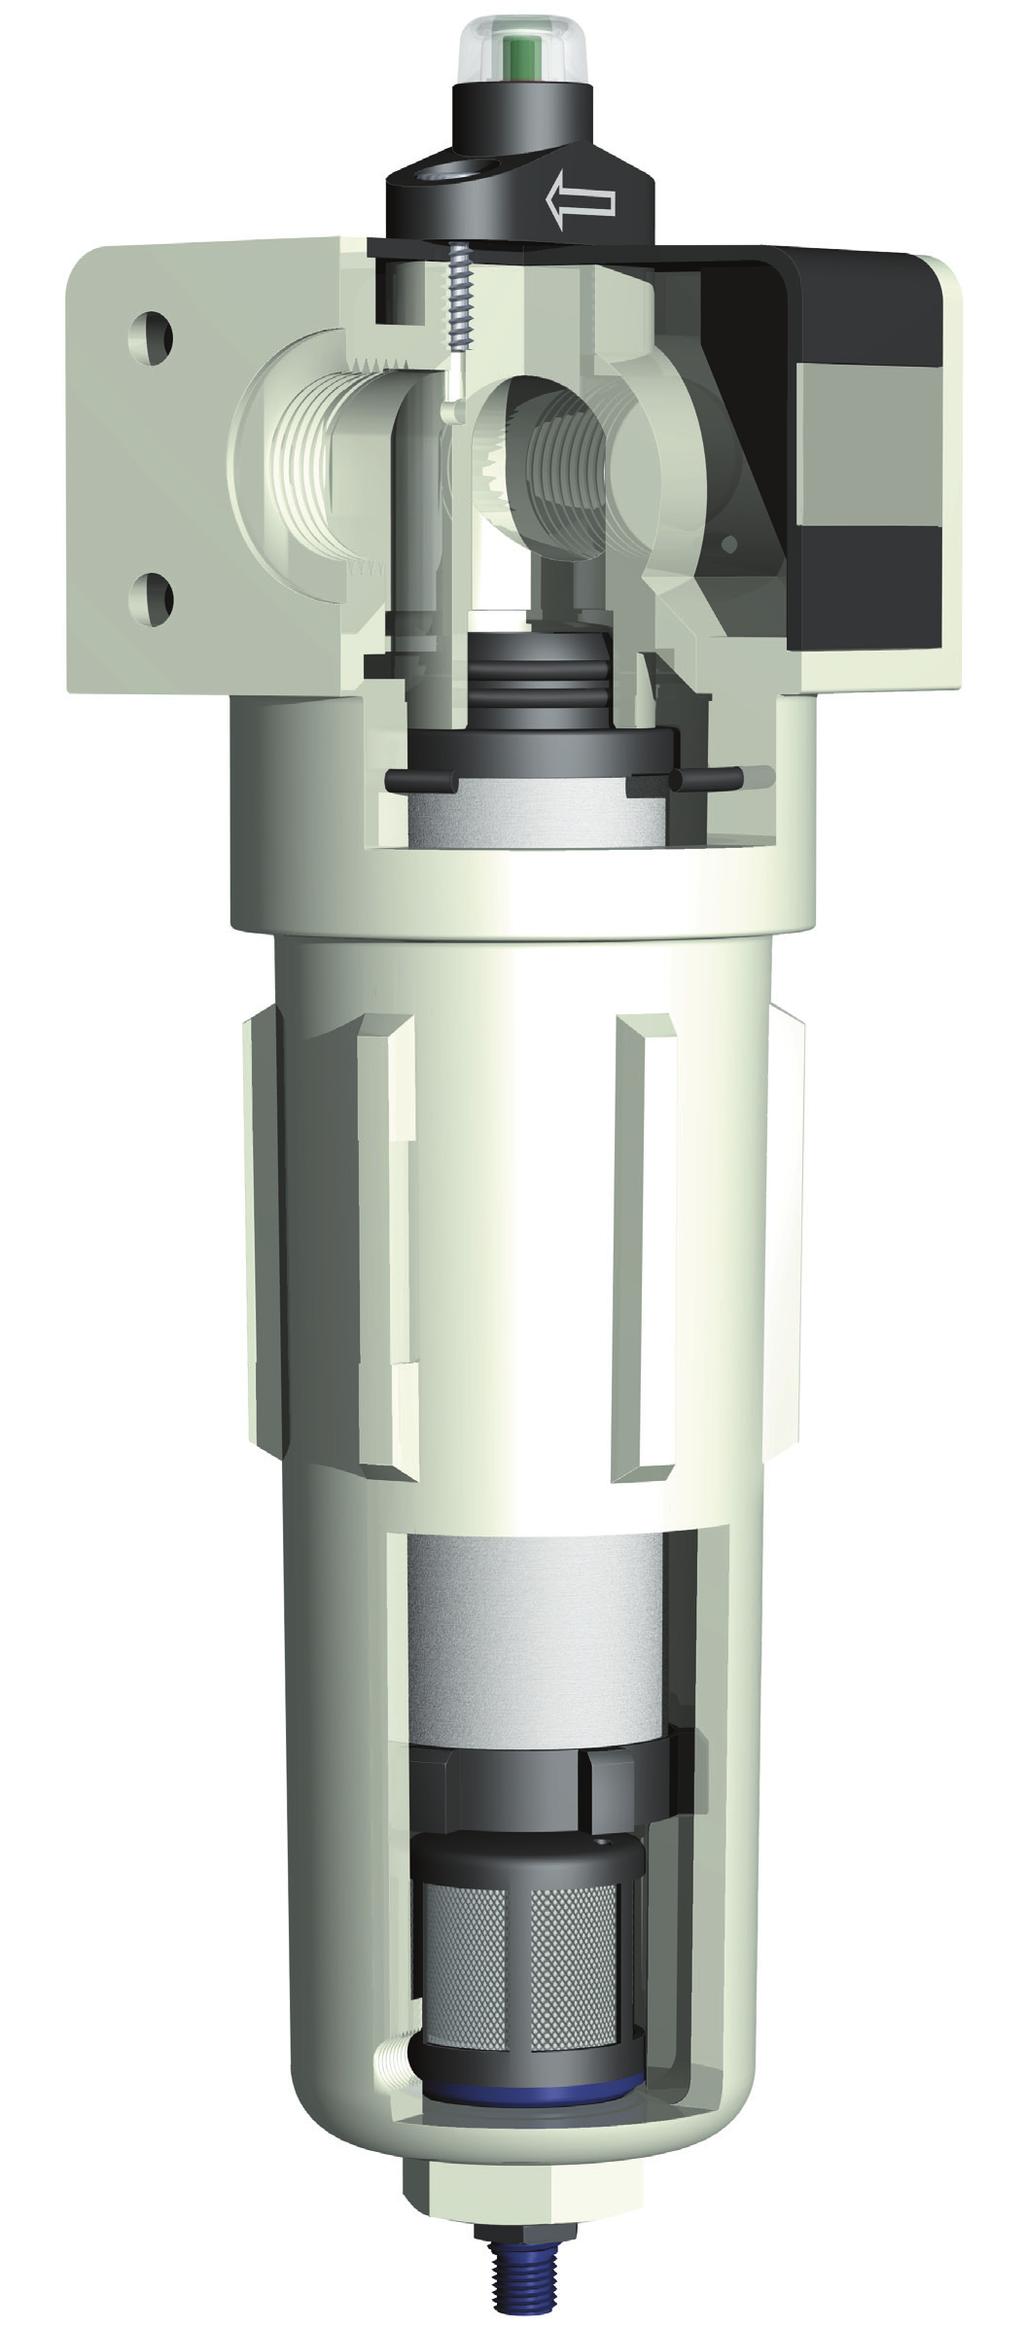 21st century filtration ifferential pressure indicator Modular NPT connections Option to bolt multiple filters together with Hi-Nitrile O-ring connection for ease of installation, leak elimination